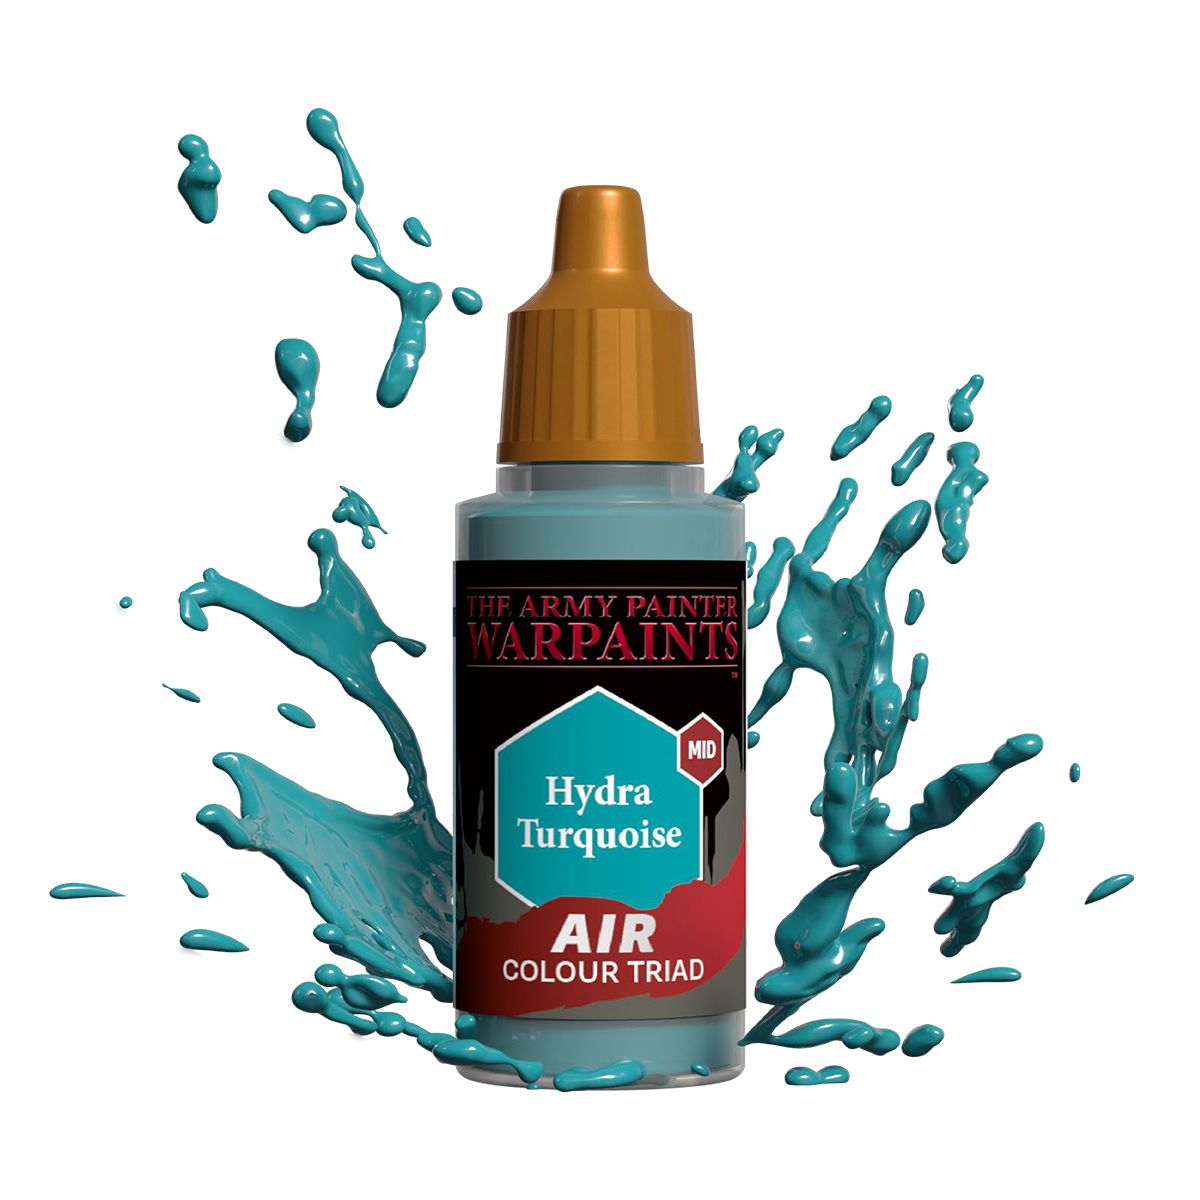 Warpaints Air : Hydra Turquoise